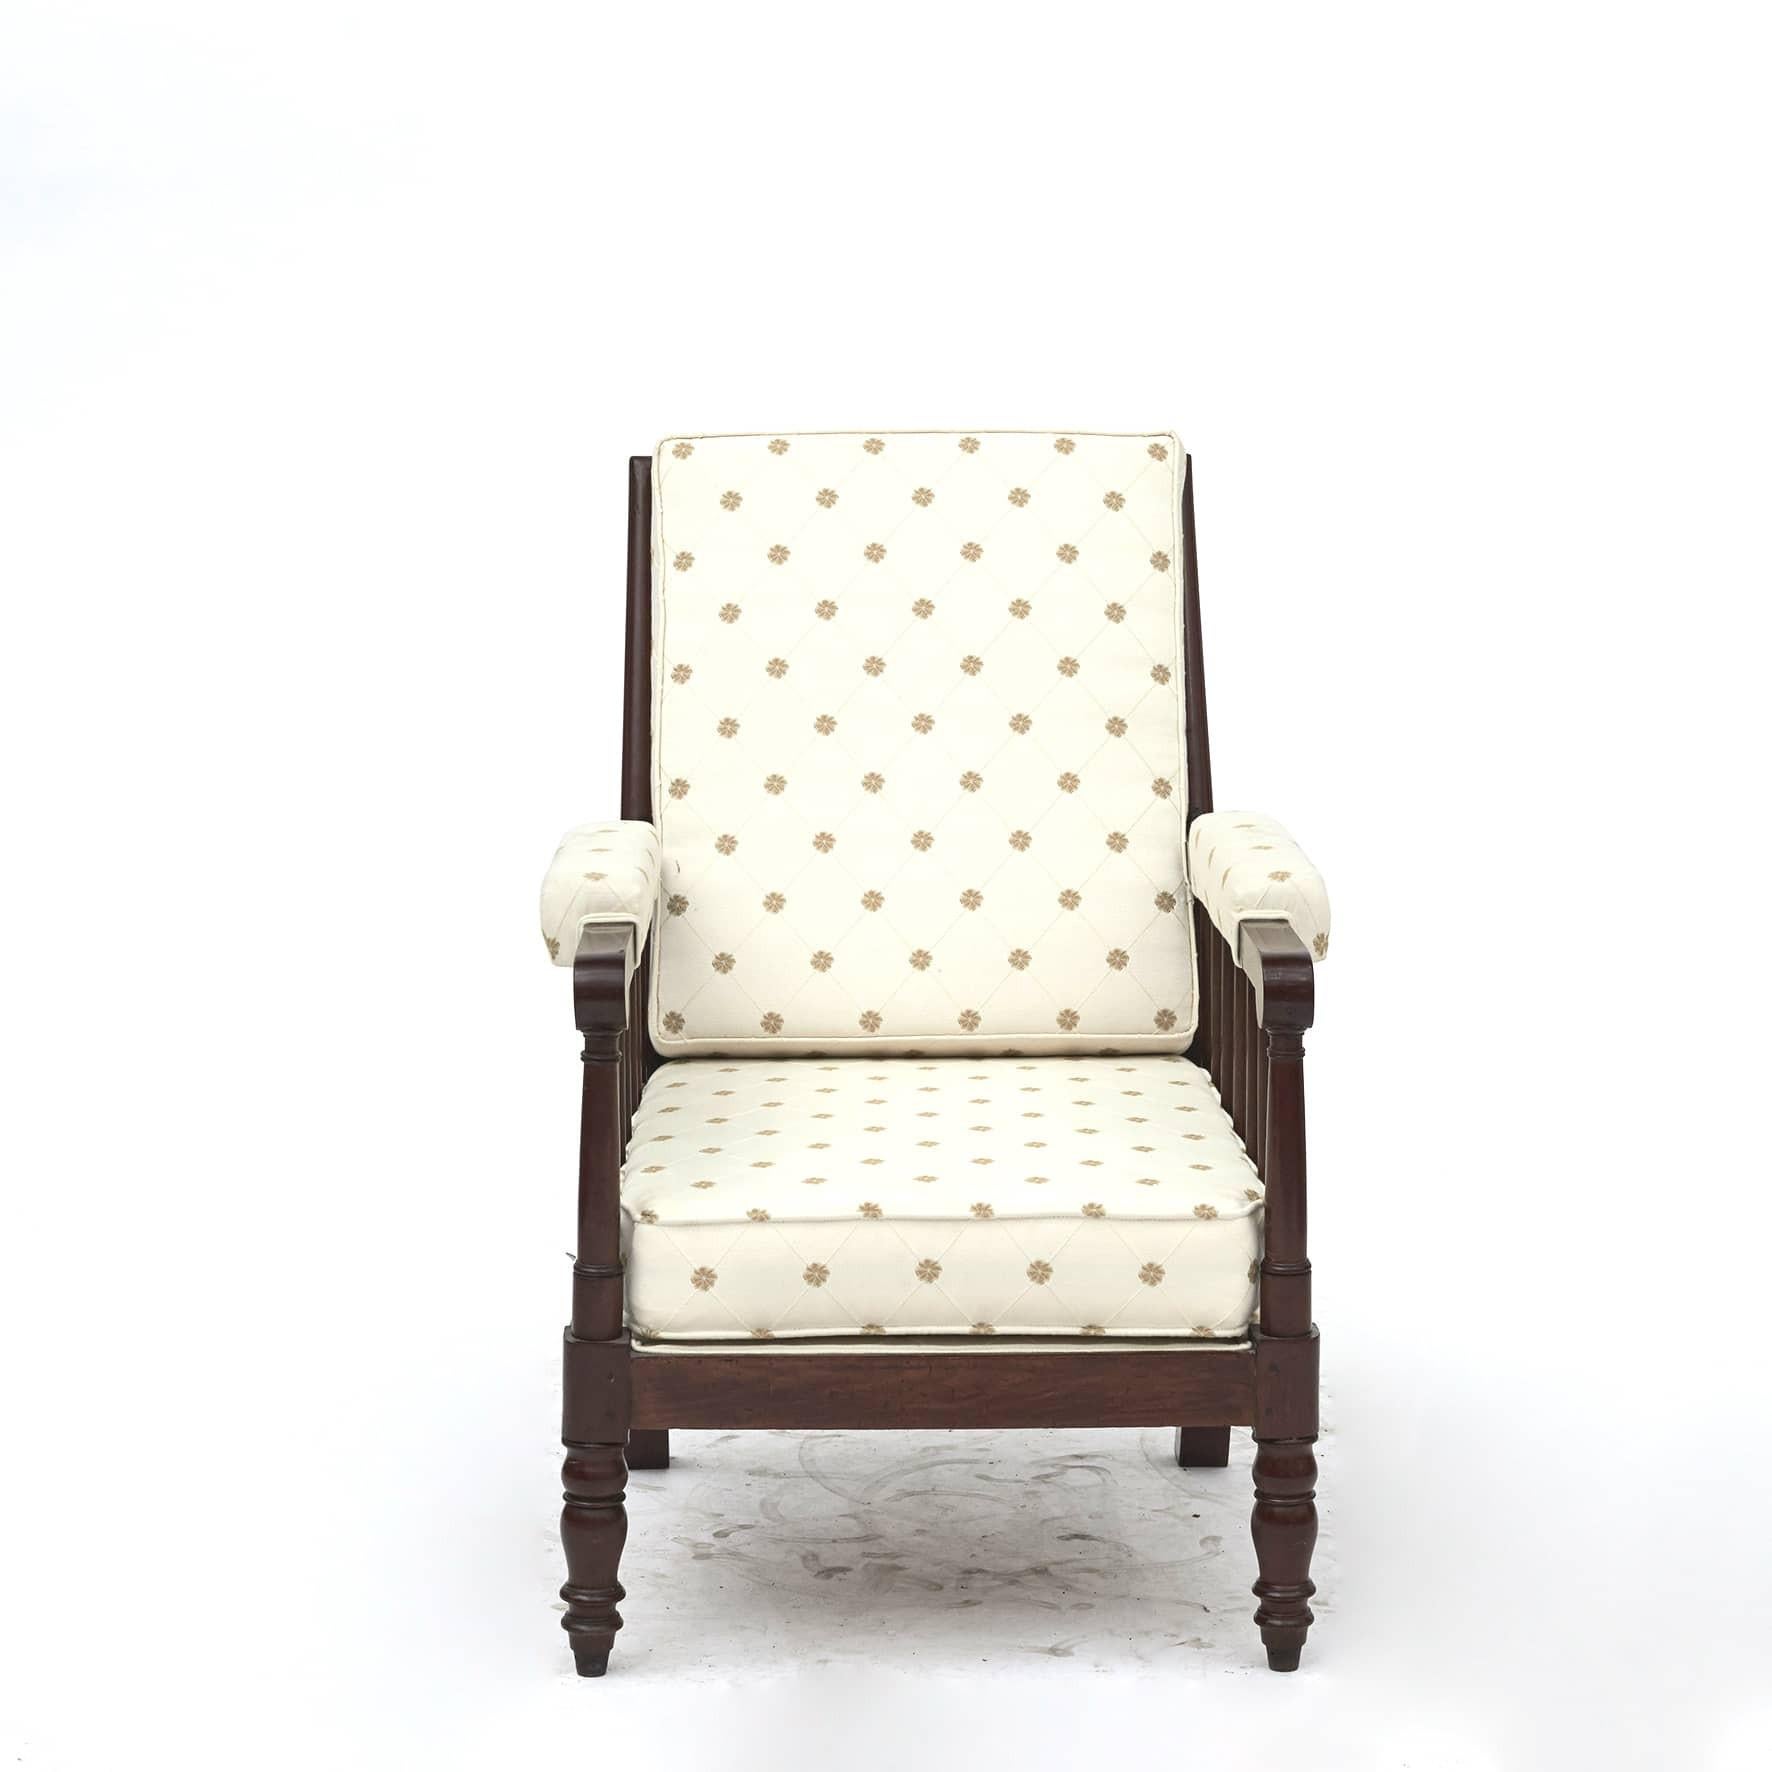 19th Century Antique Regency Armchair, England Approx. 1810 - 1820 For Sale